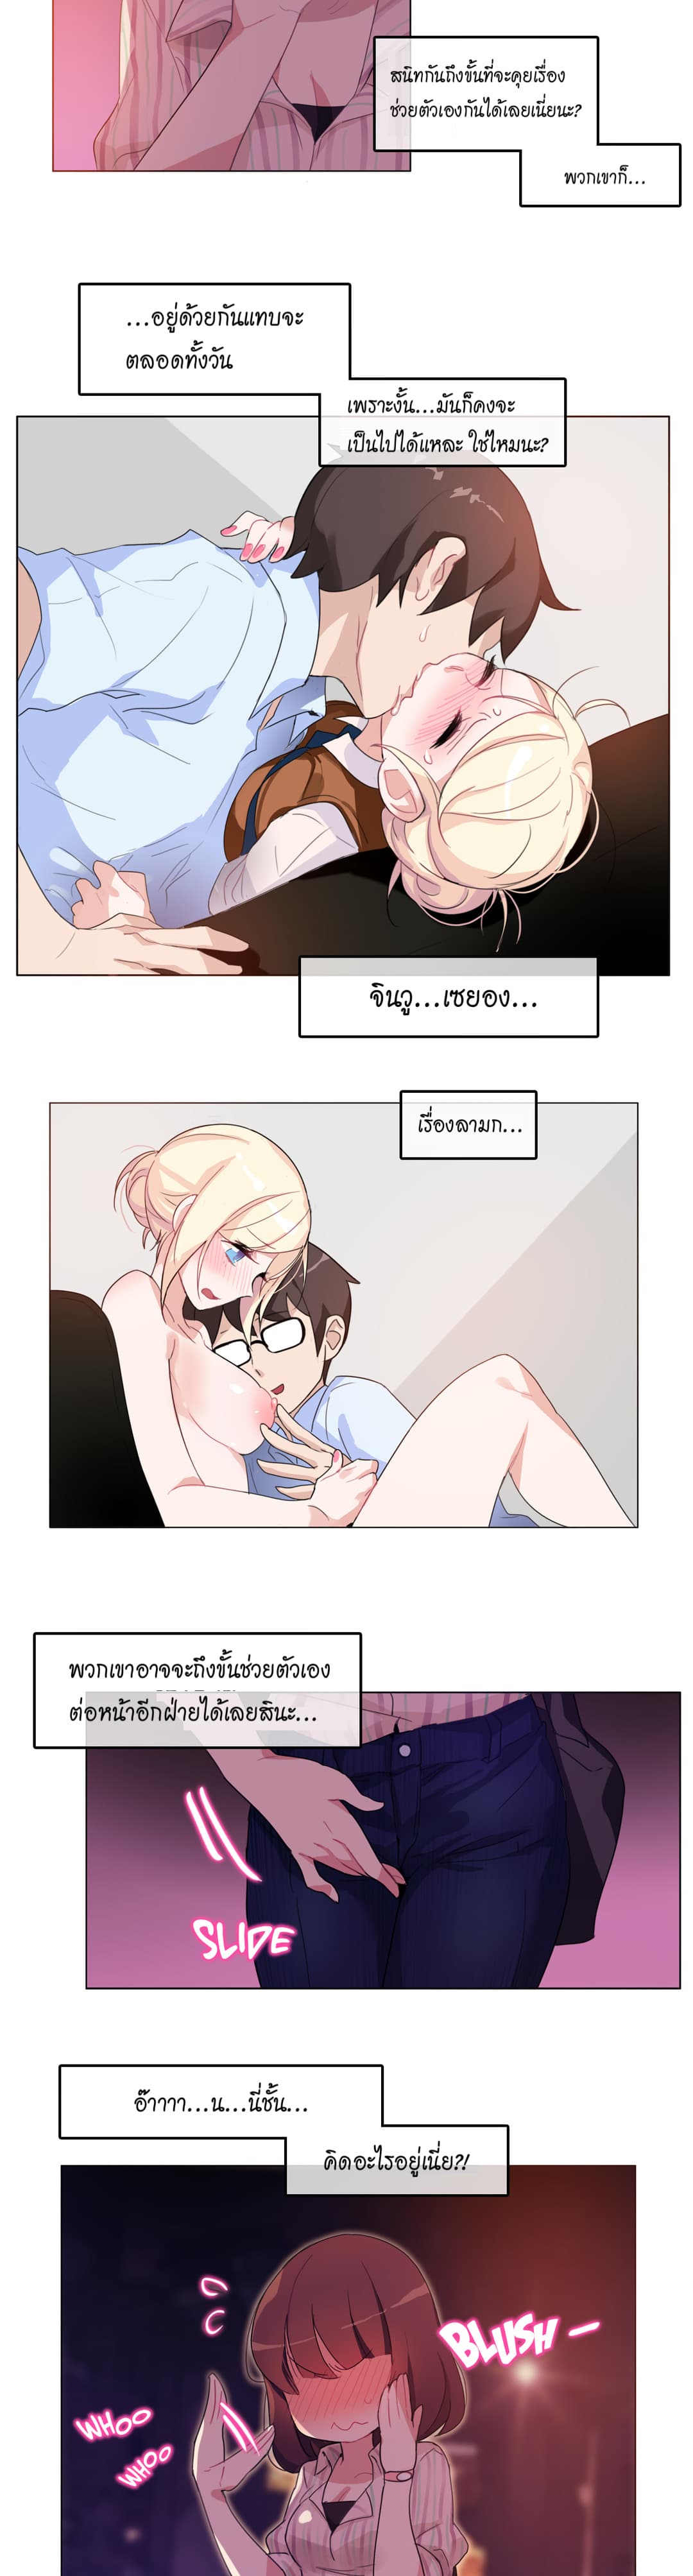 A Pervert’s Daily Life 9 (10)